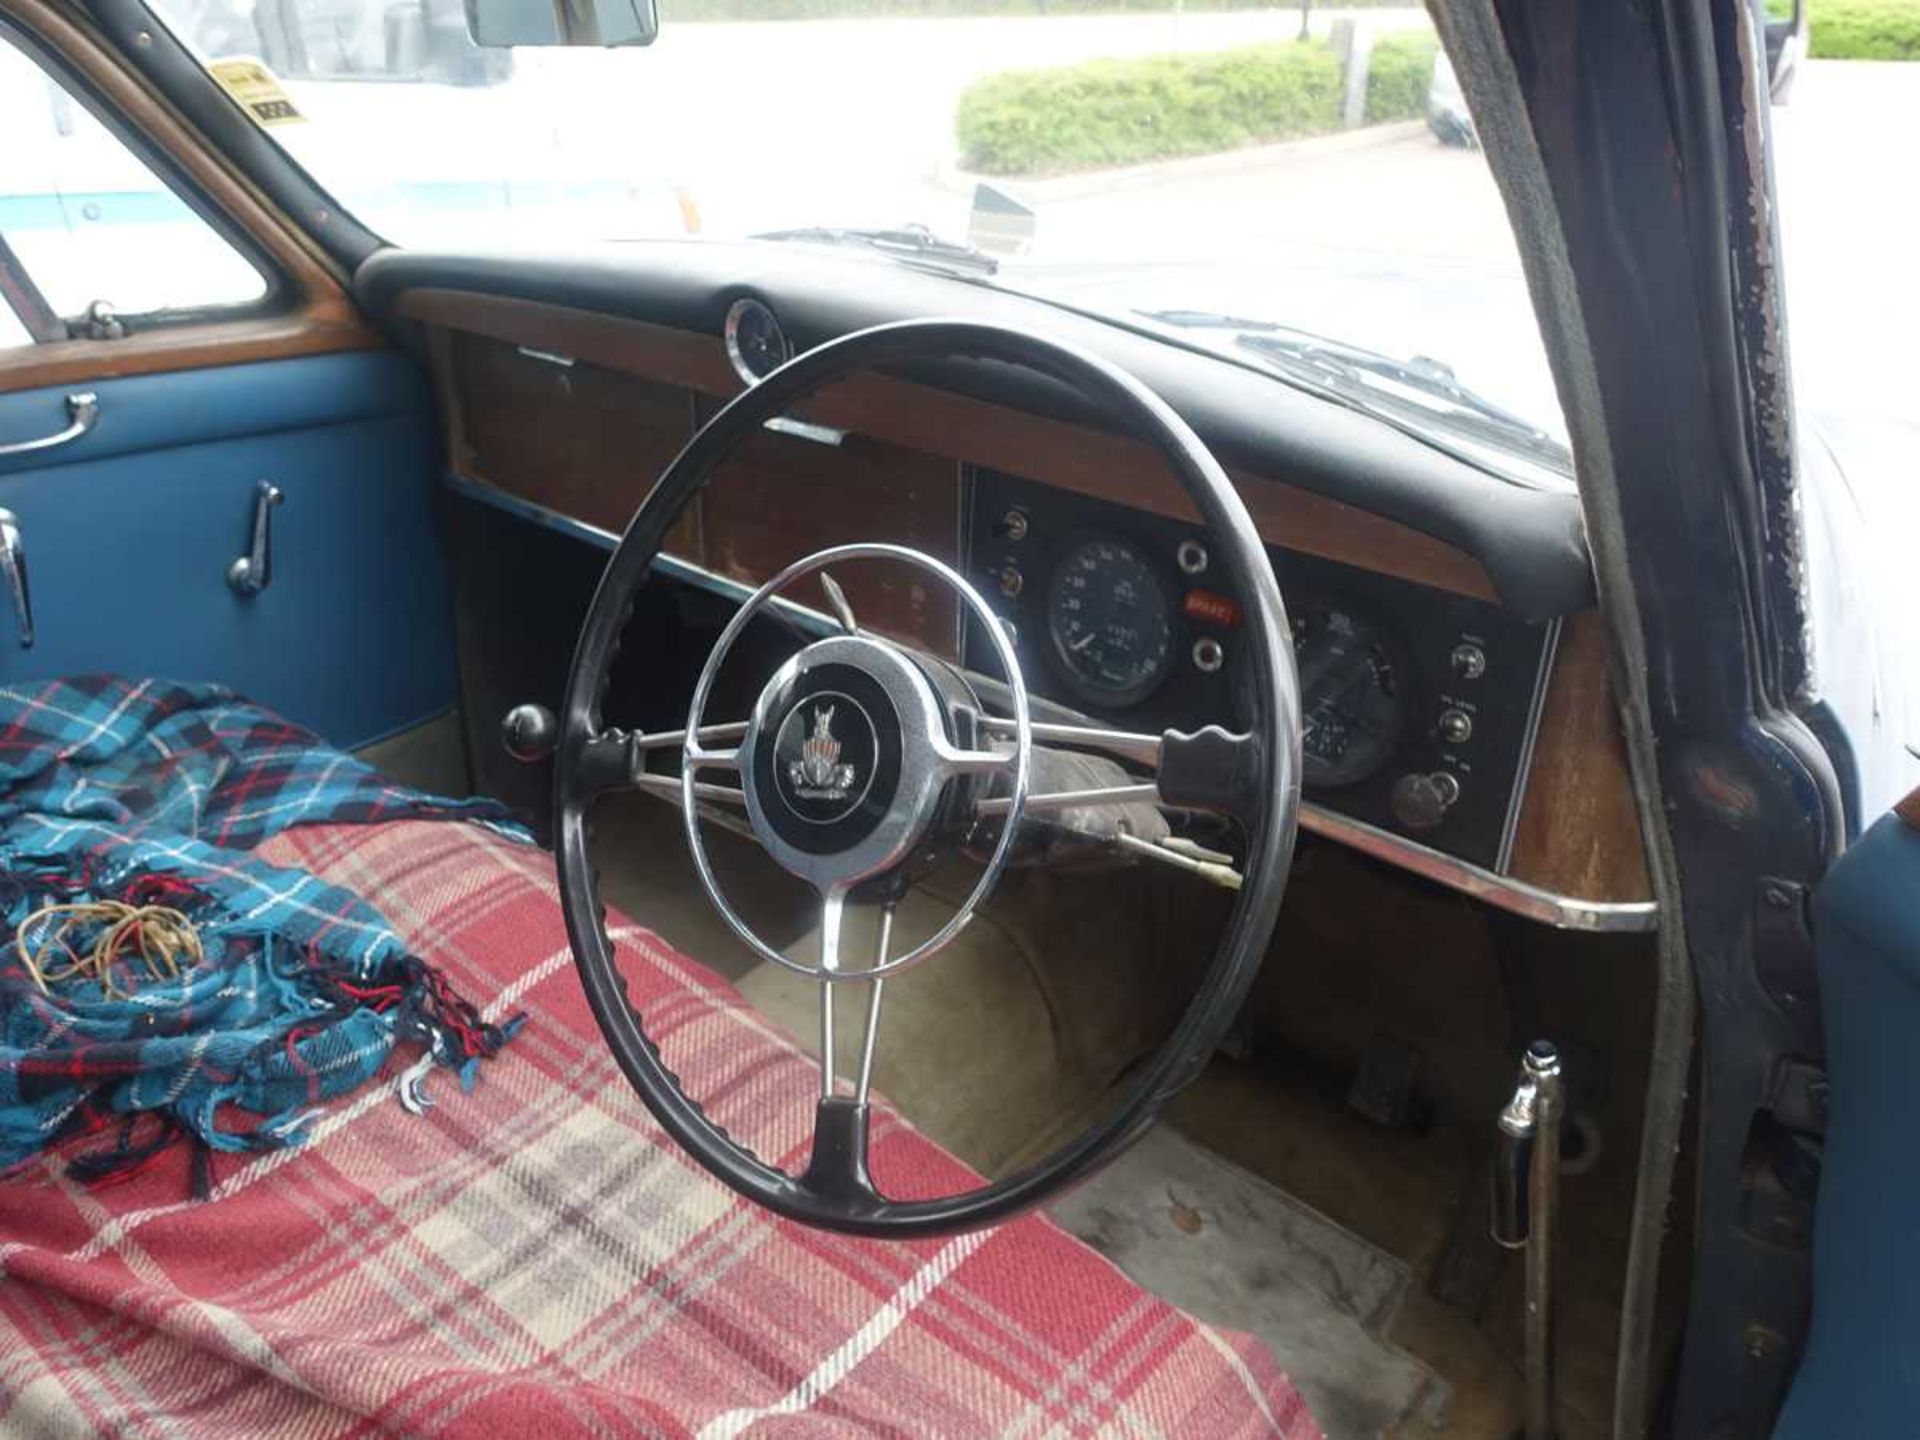 (ACK 307A) 1963 Rover P4 110 4-door saloon in blue, 2625cc petrol with overdrive, first registered - Image 5 of 7